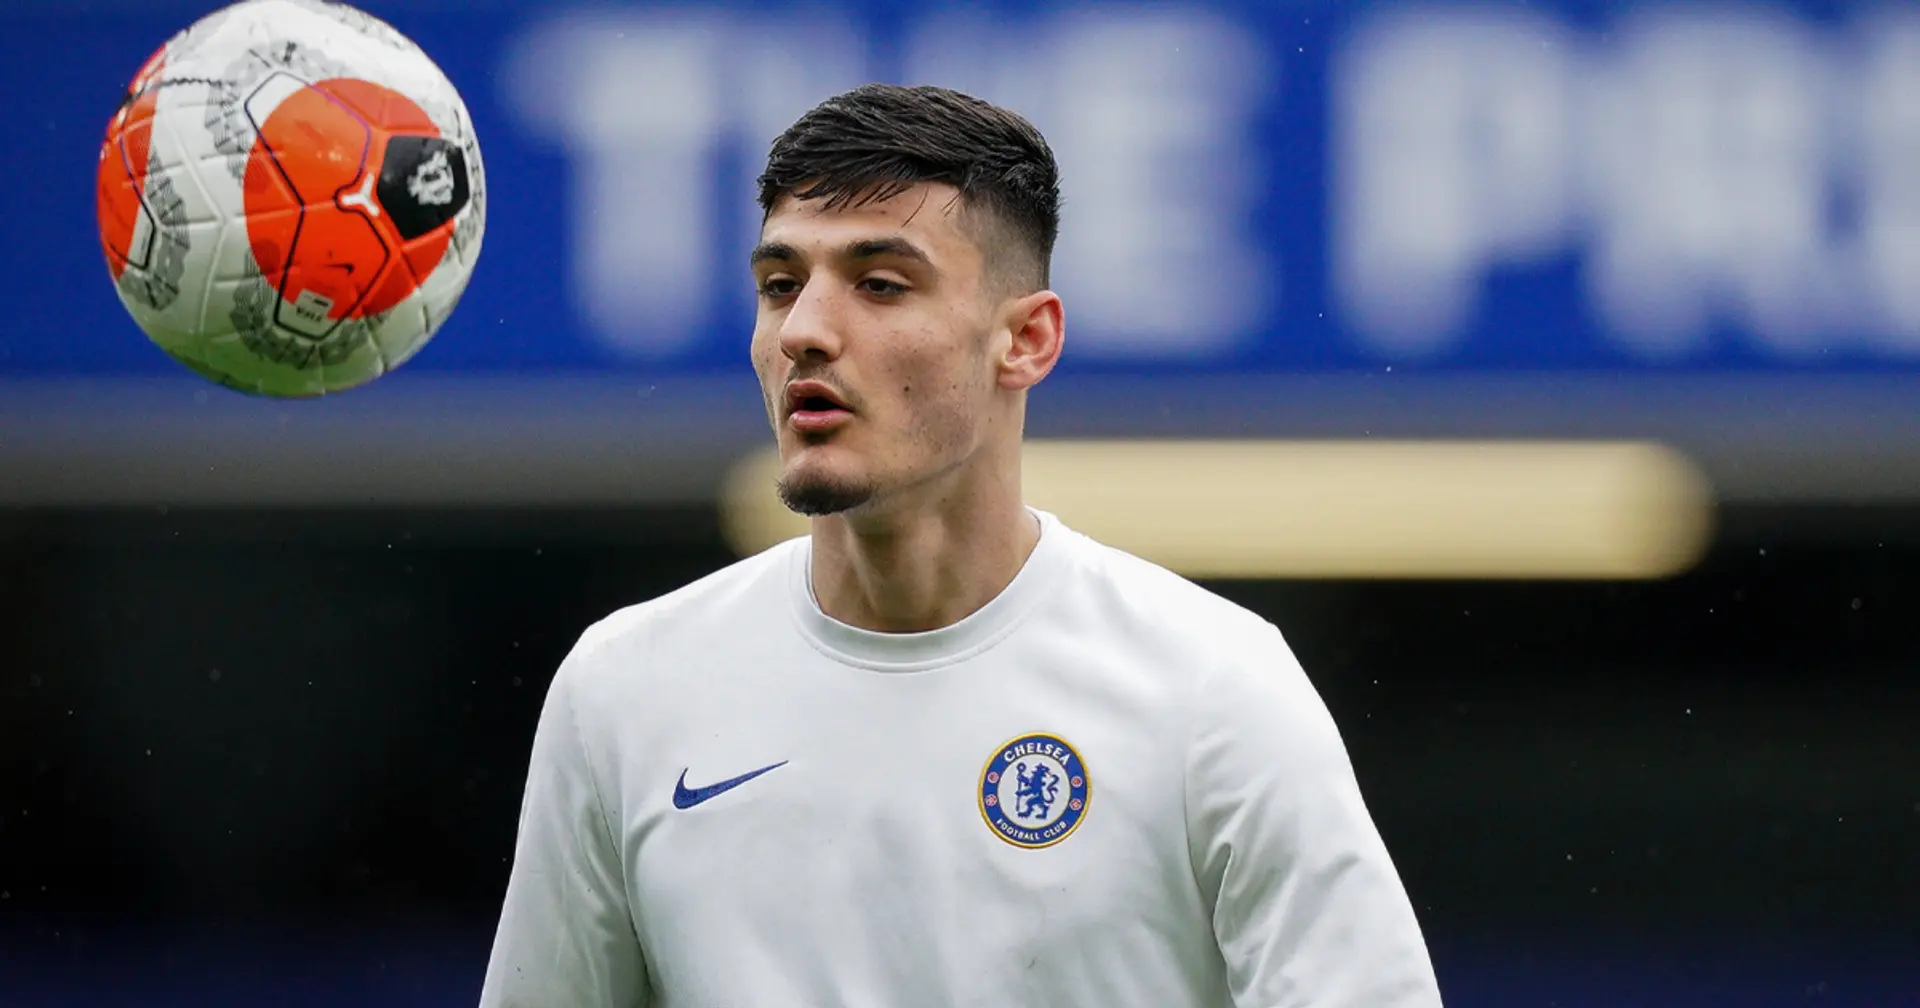 'Really looking forward to making an impact': Armando Broja reacts after signing long-term Chelsea deal